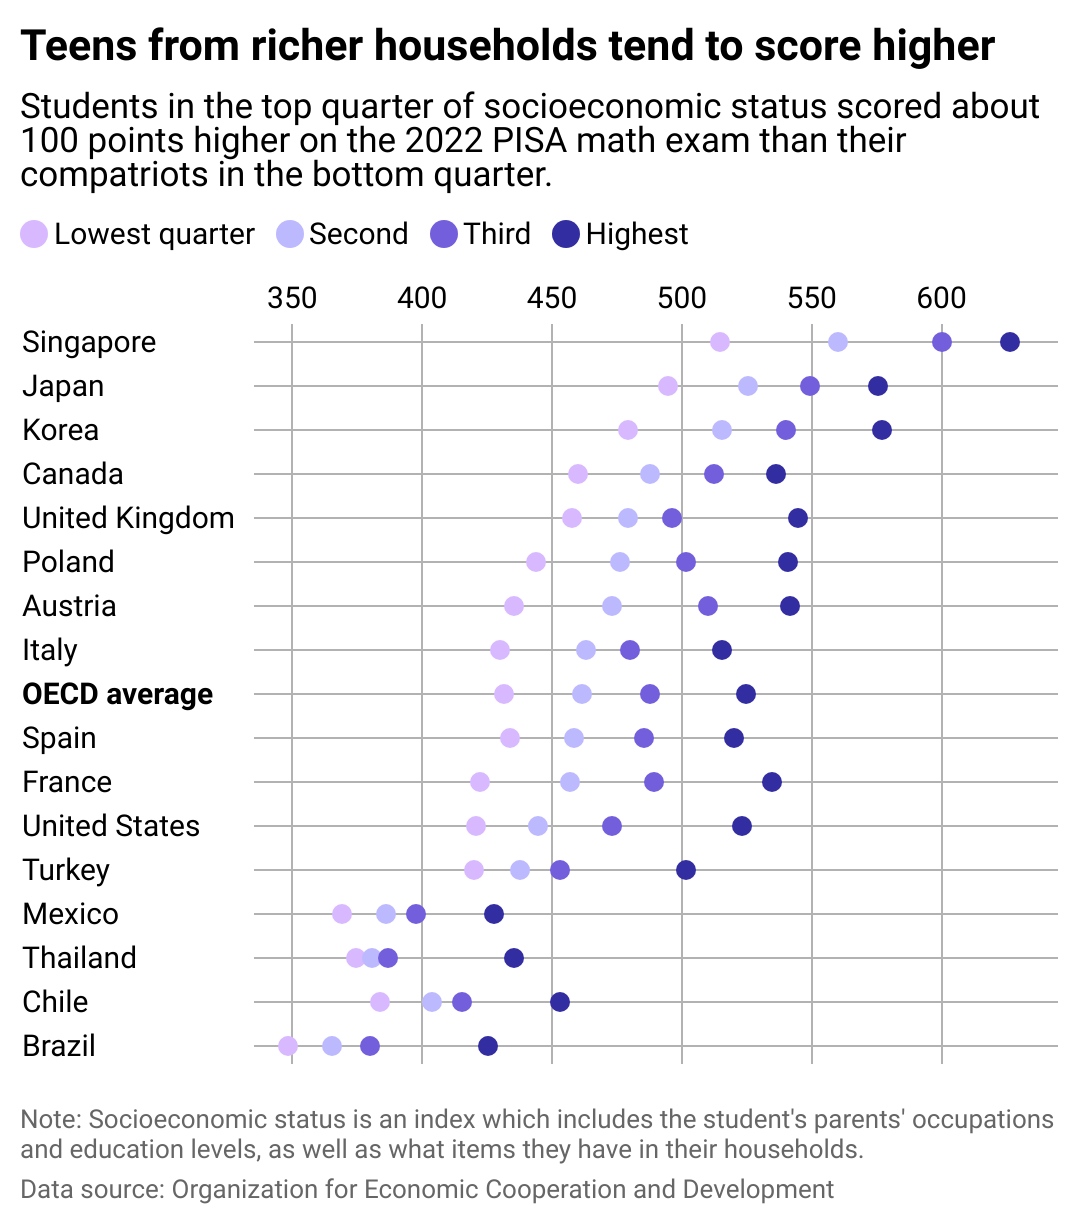 A chart showing PISA scores in 2022, broken down by country and socioeconomic status. Teens from the richest 25% of households scored an average of around 100 points higher than their compatriots in the bottom 25% in math.